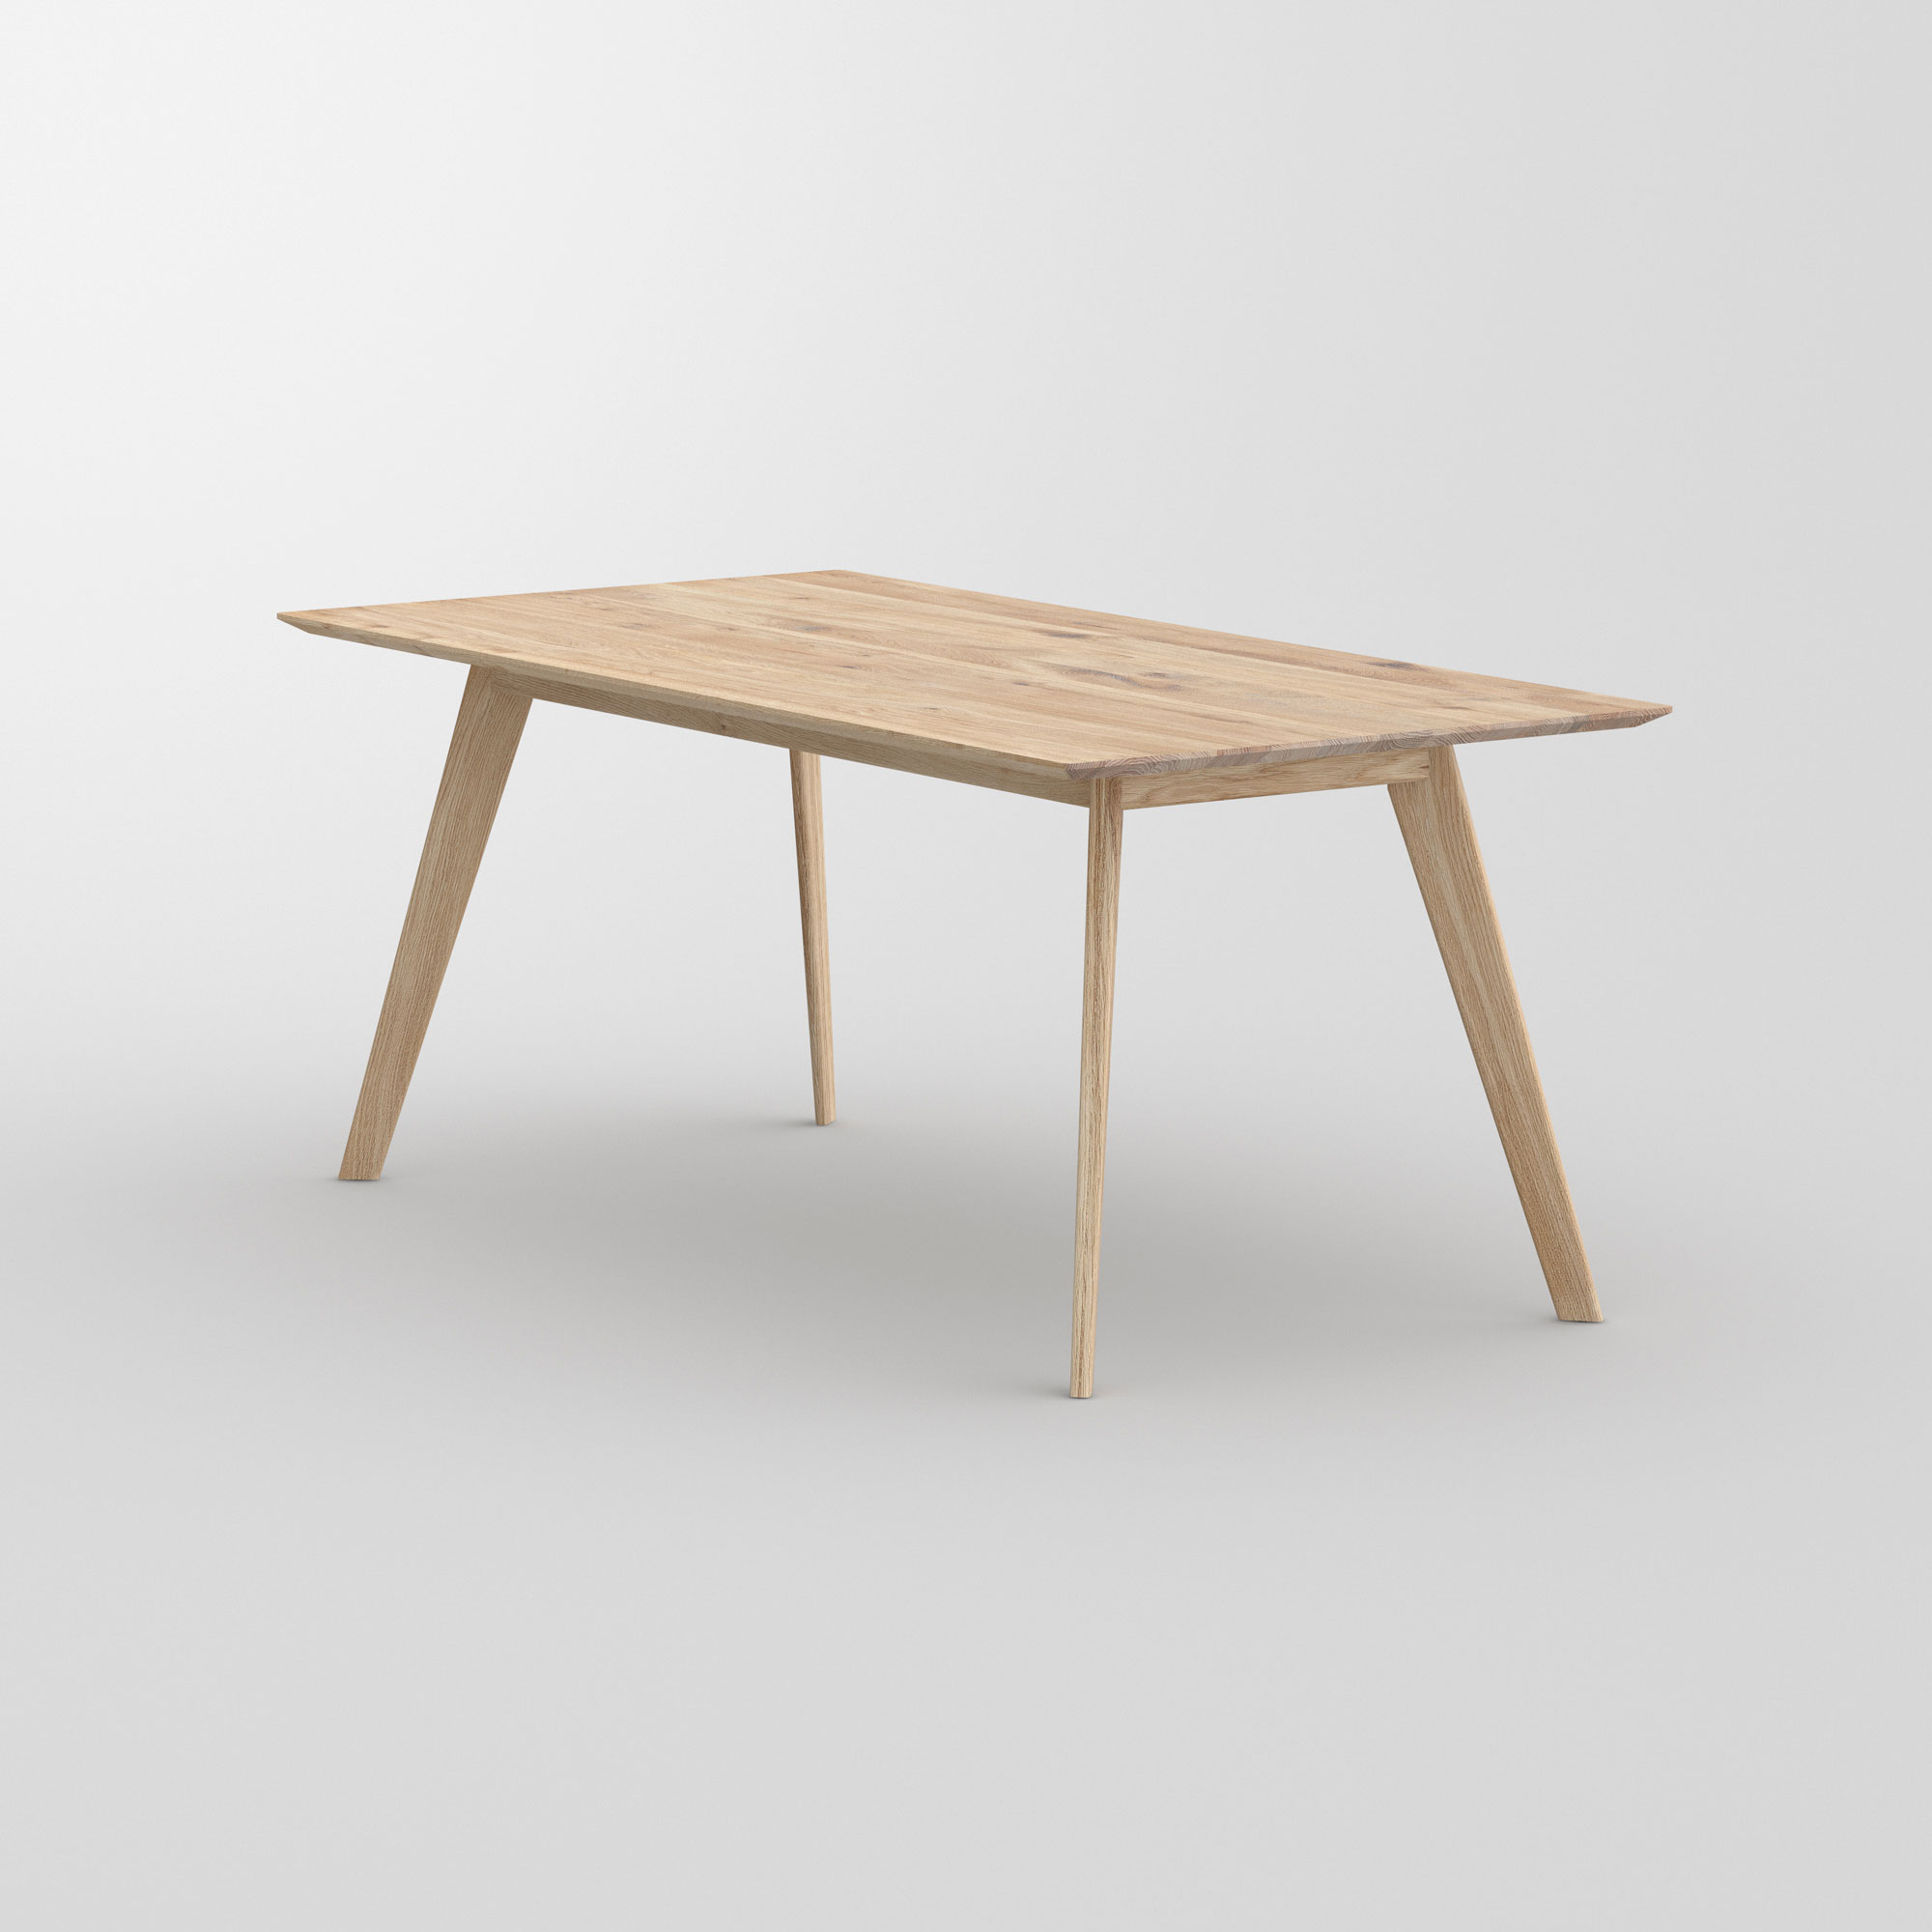 Soft Solid Wood Table CITIUS SOFT cam3 custom made in solid wood by vitamin design